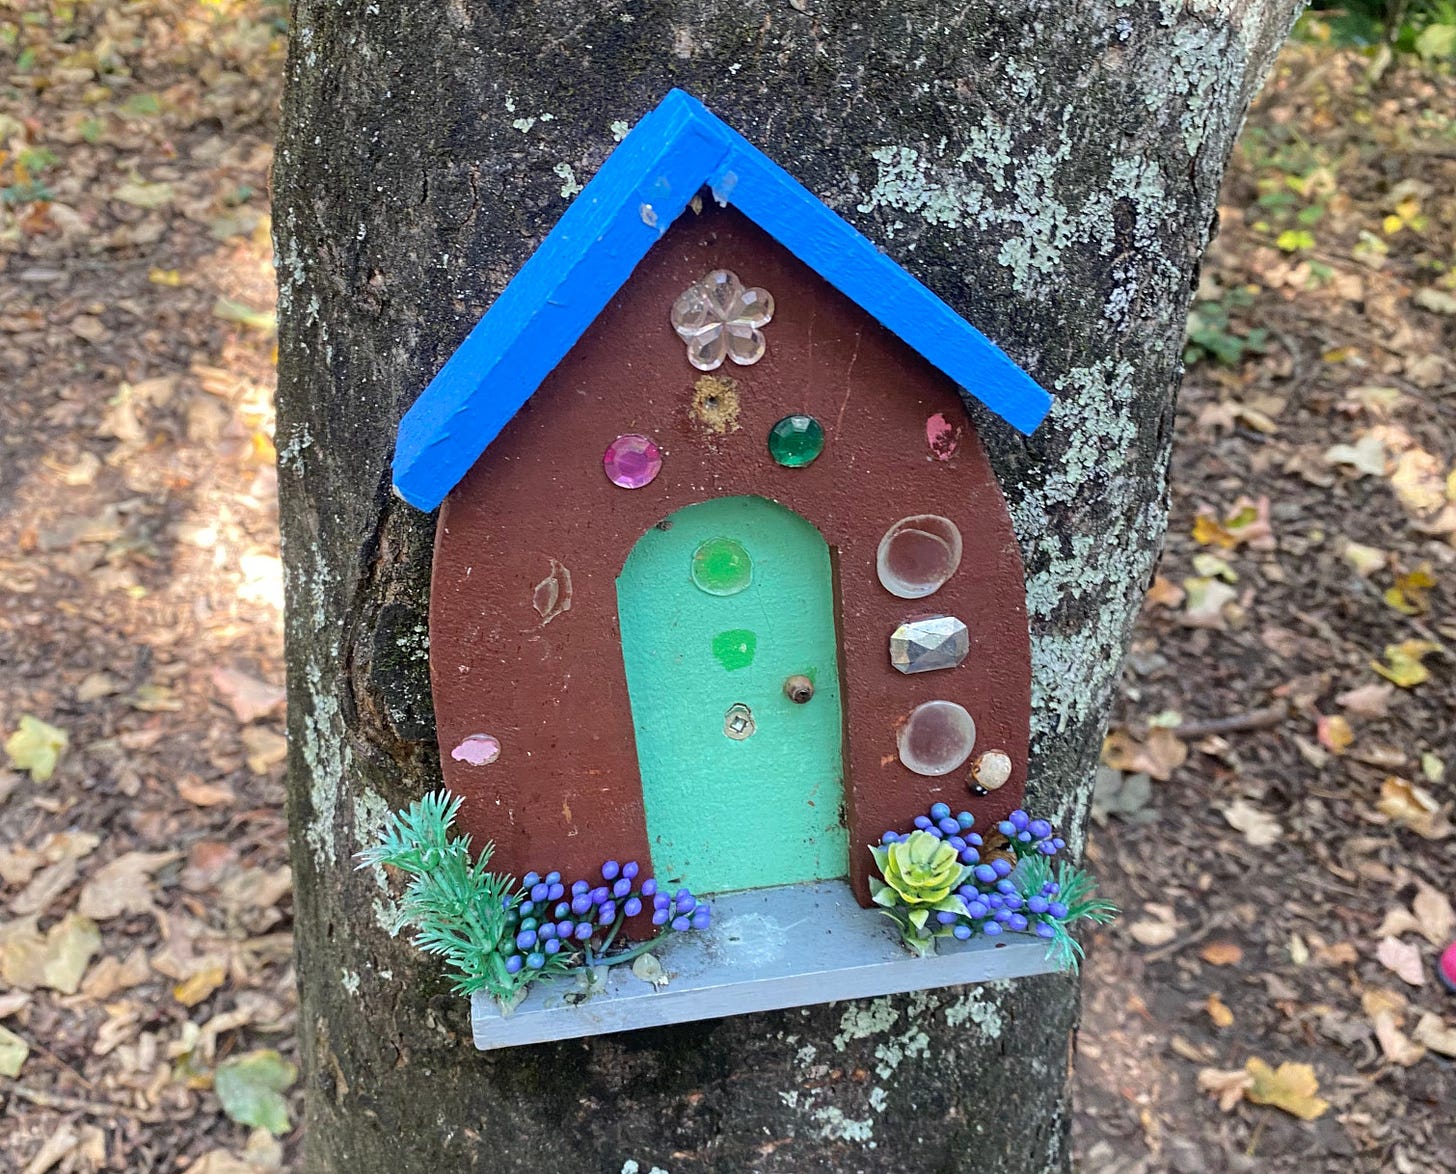 A photograph of a wooden fairy house with a blue roof and brown walls, nailed to a tree in a forest.